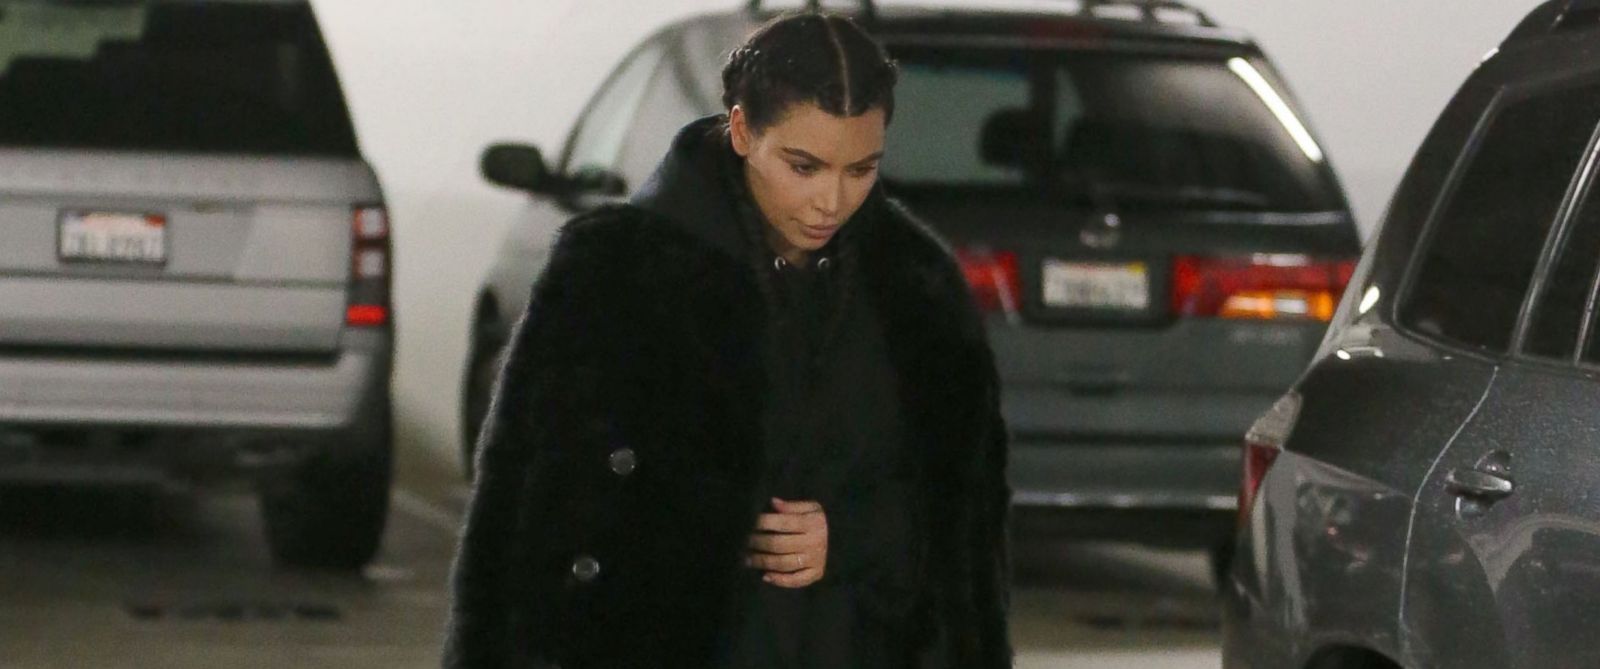  low profile since the birth of her son Saint West last month